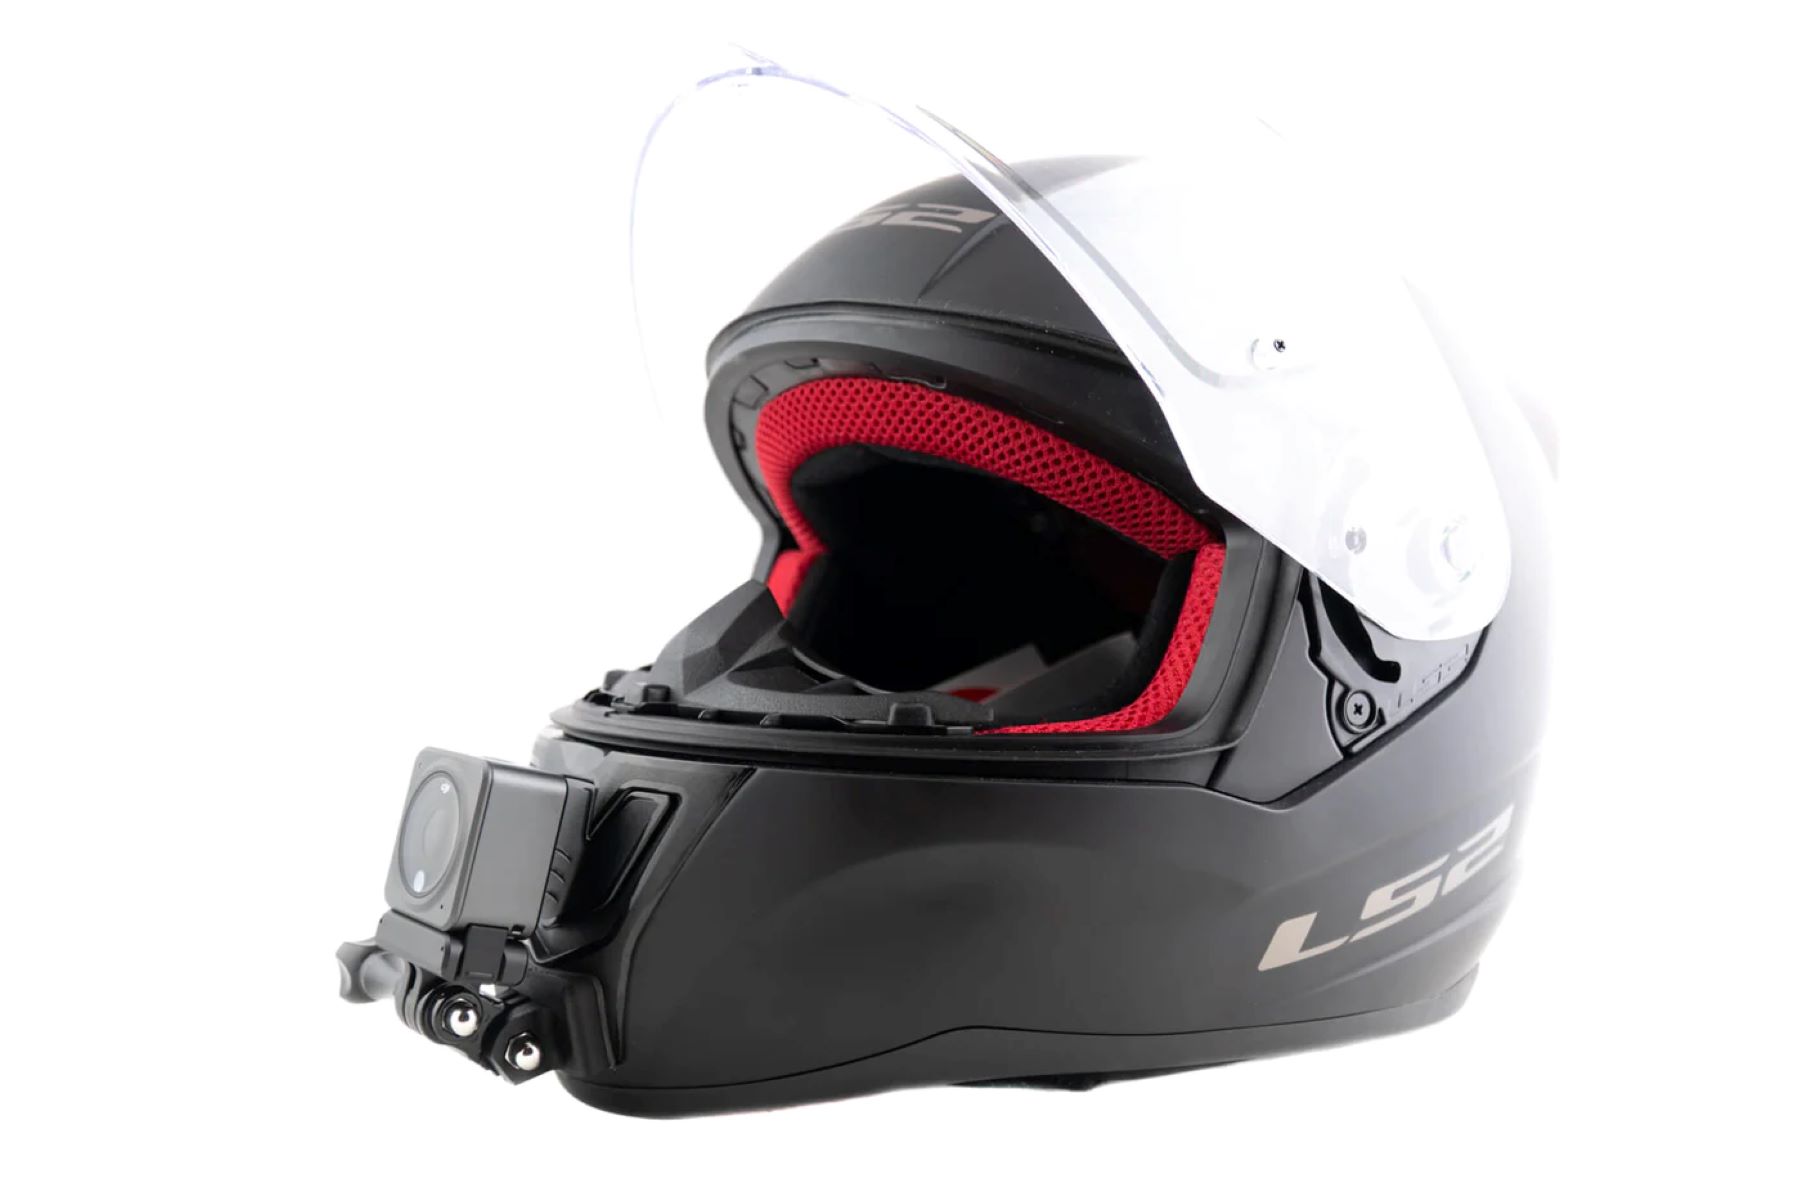 How To Attach Action Camera To Motorcycle Helmet